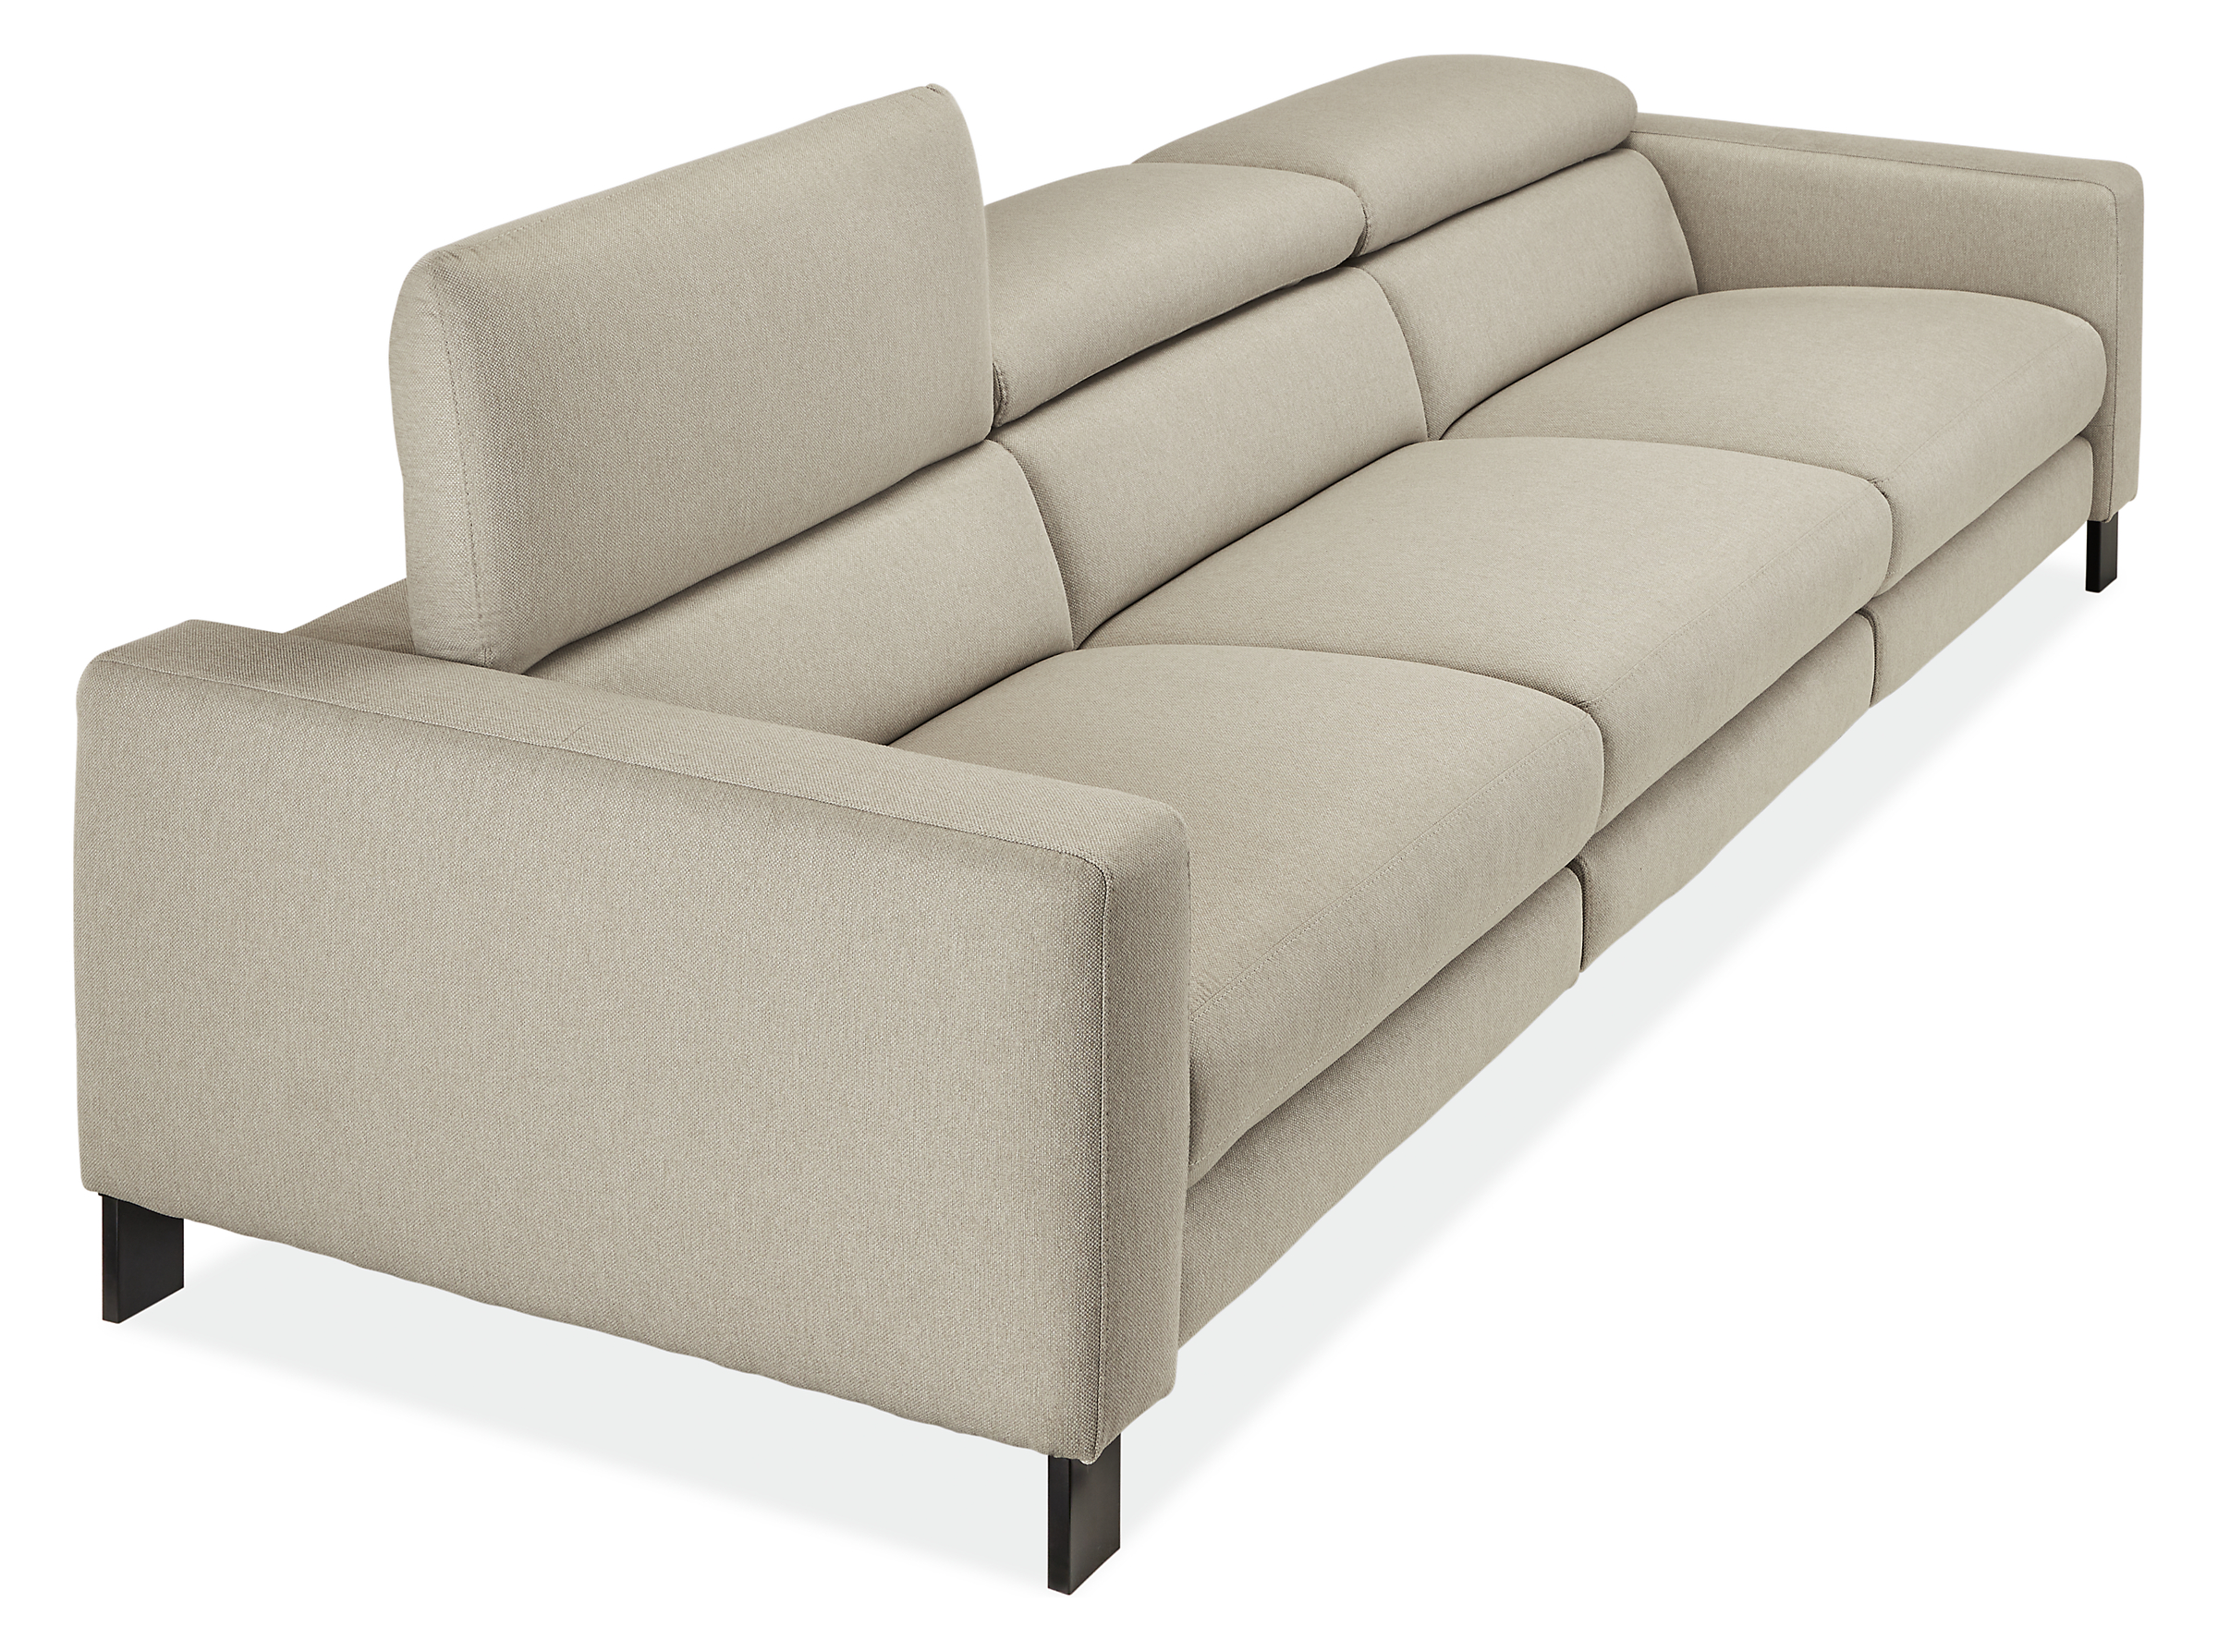 detail of gray Elio sofa with 1 headrest fully extended.